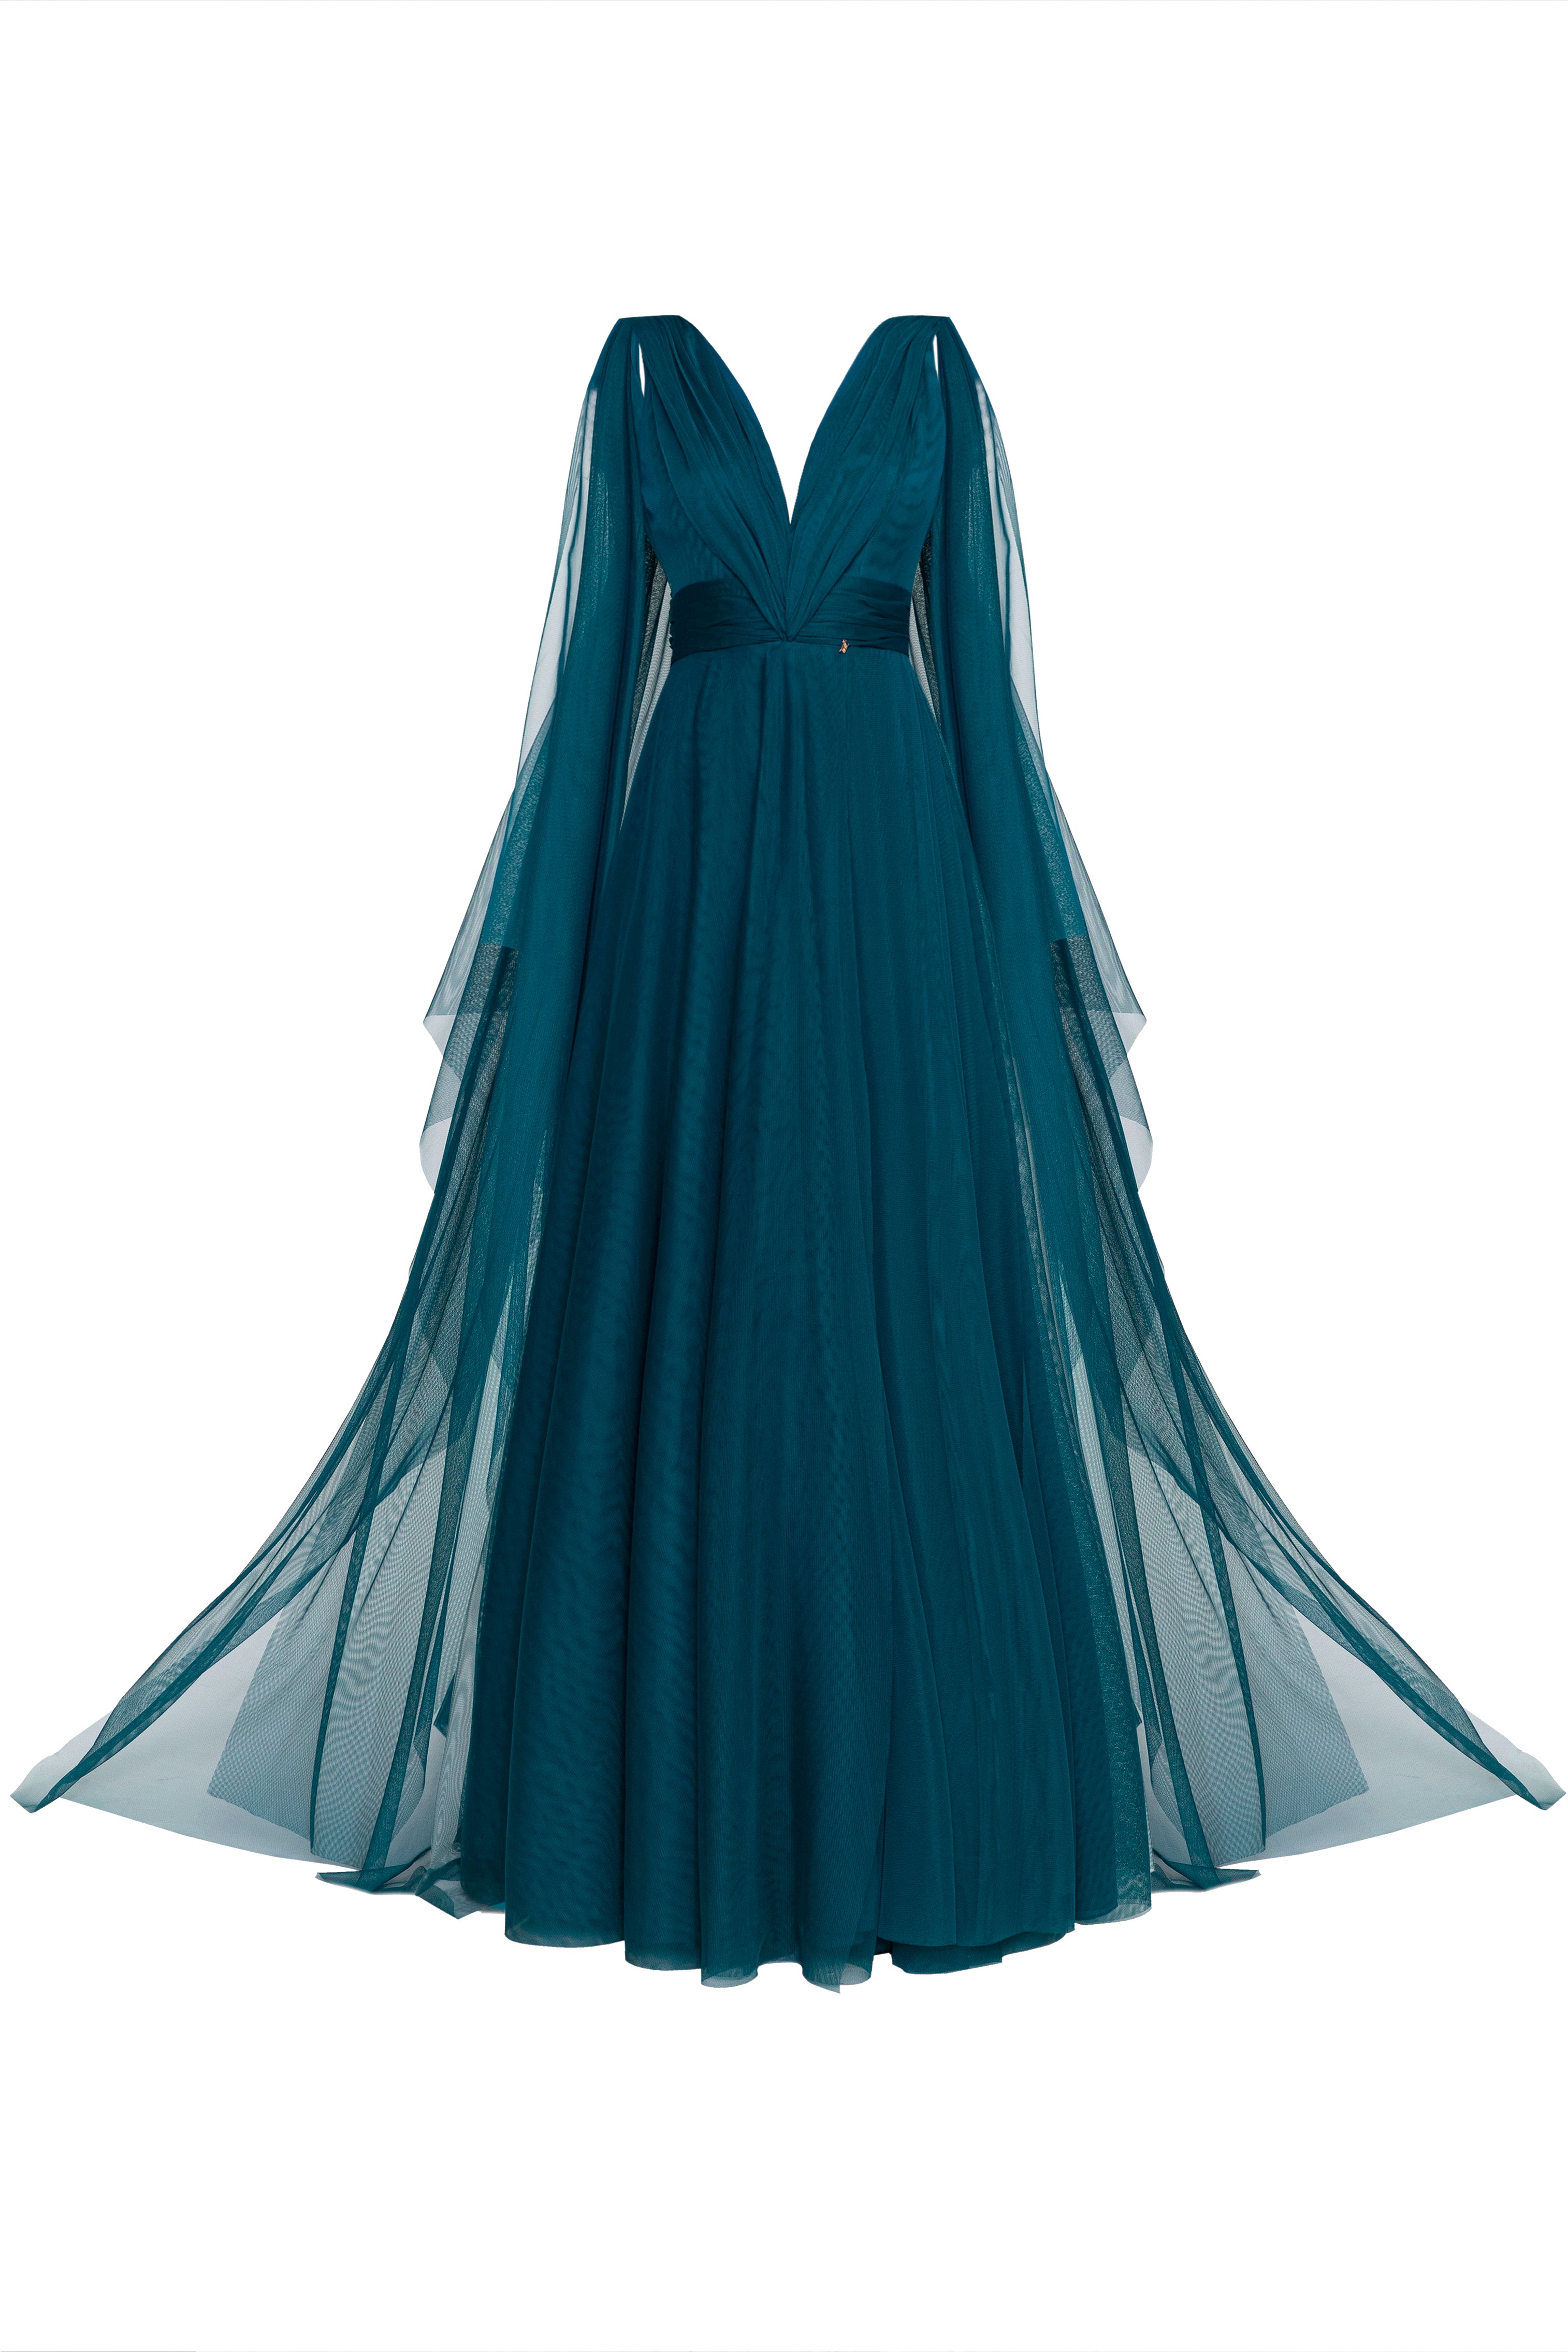 Tulle Terracotta Evening Gown Petrol blue